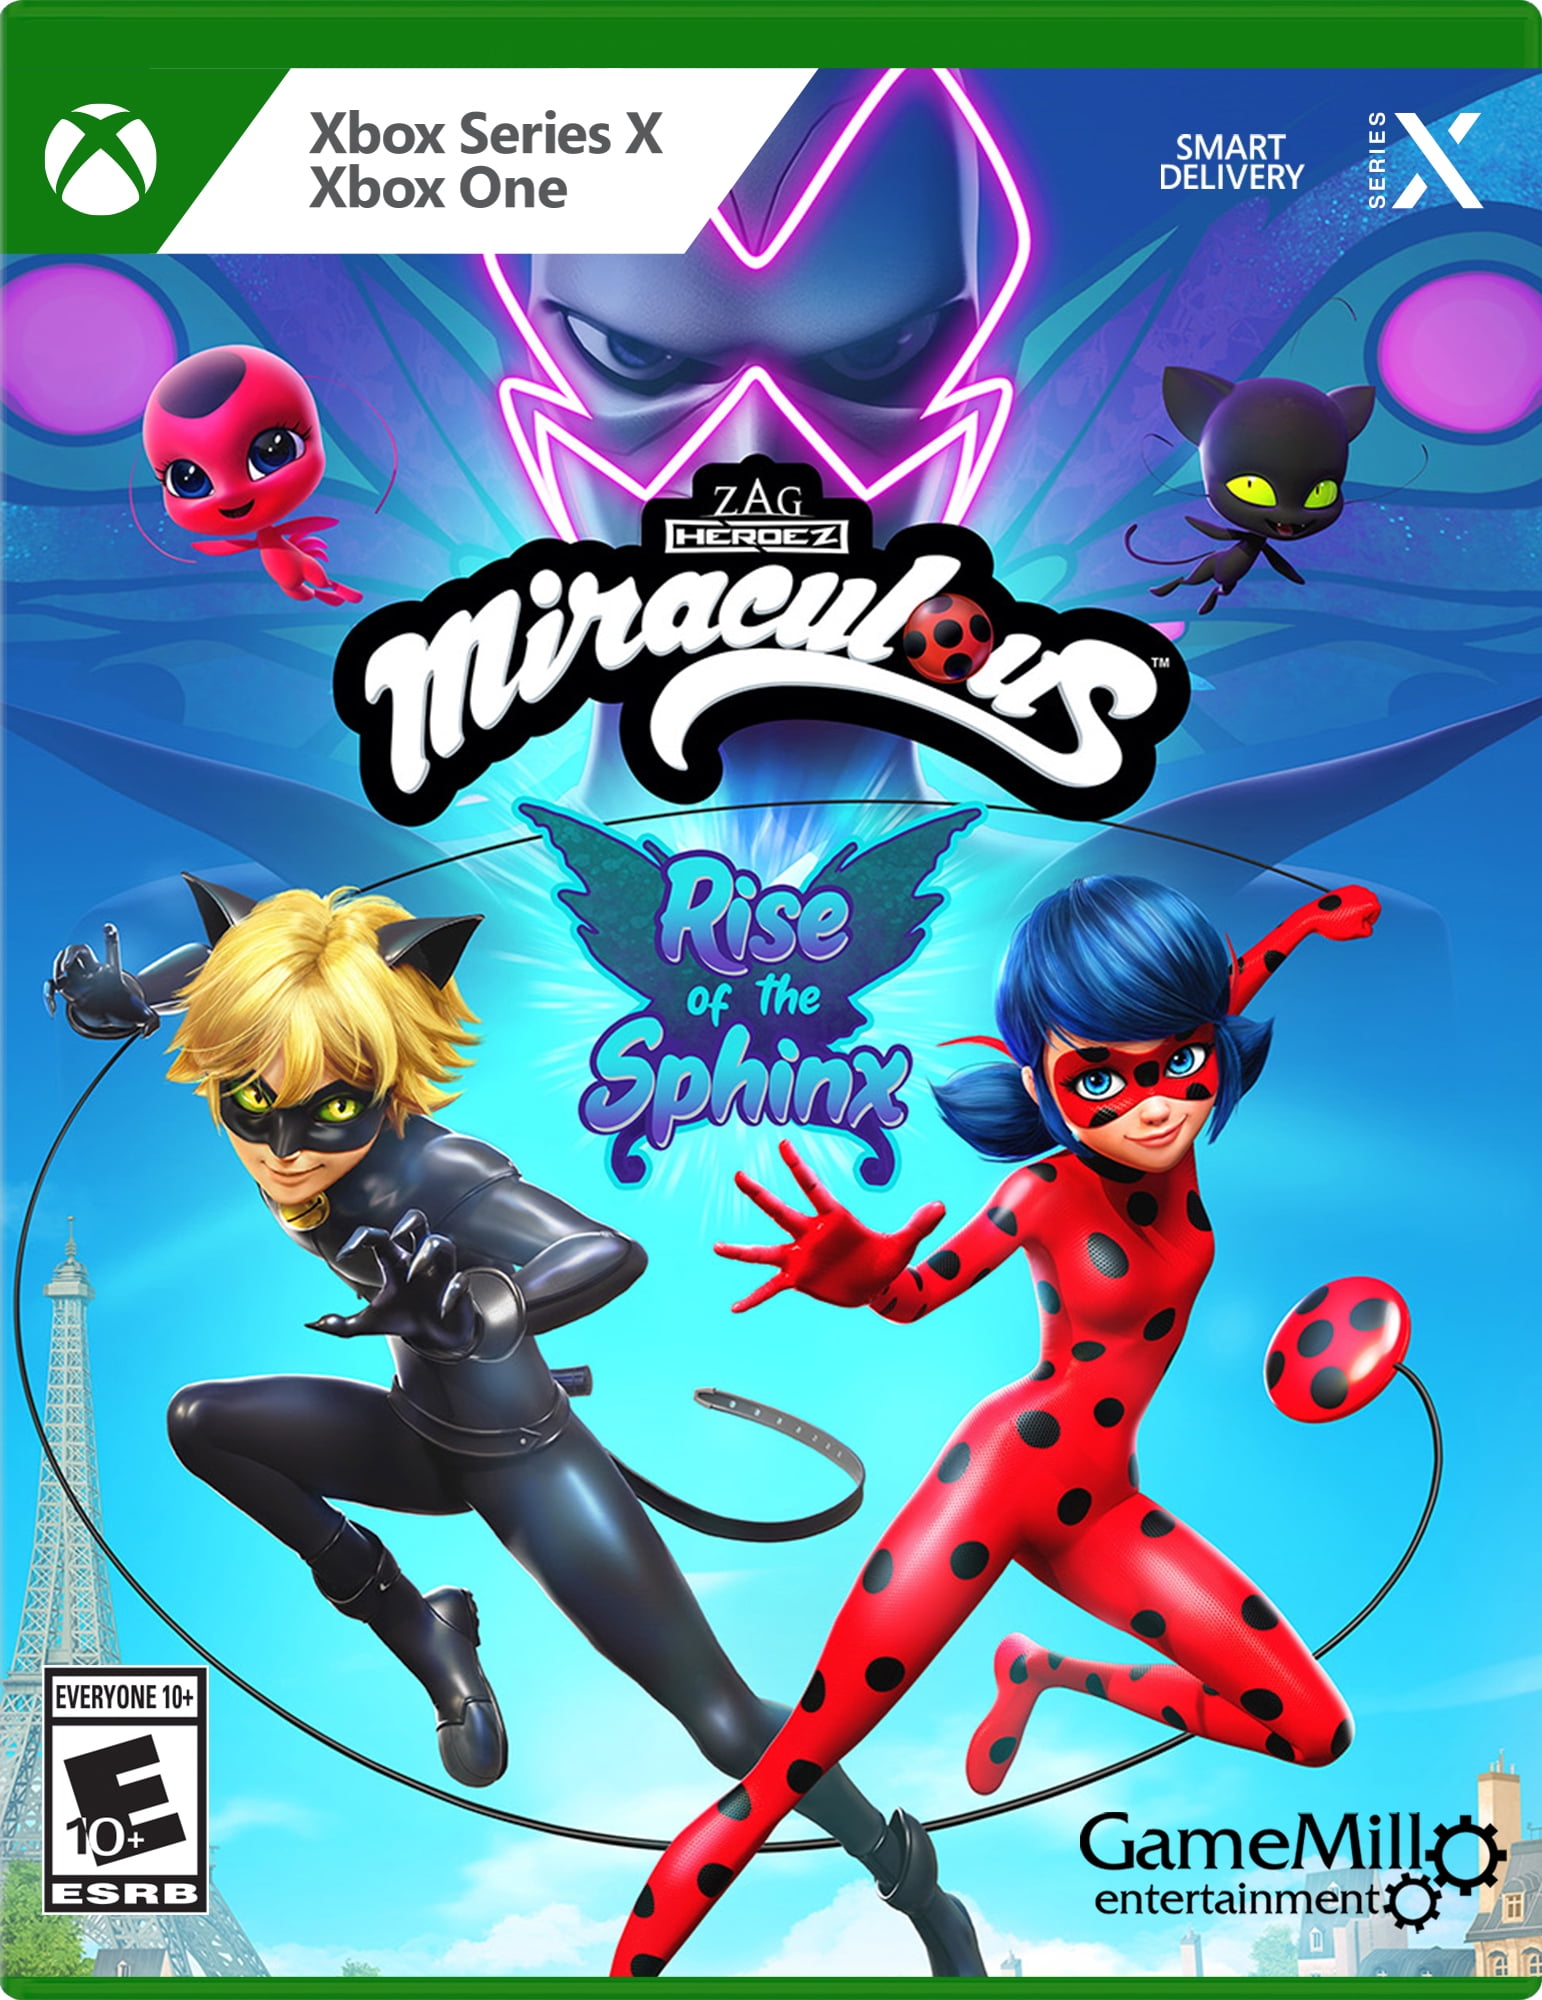 Miraculous: Rise of the Sphinx, Gamemill, Xbox Series X